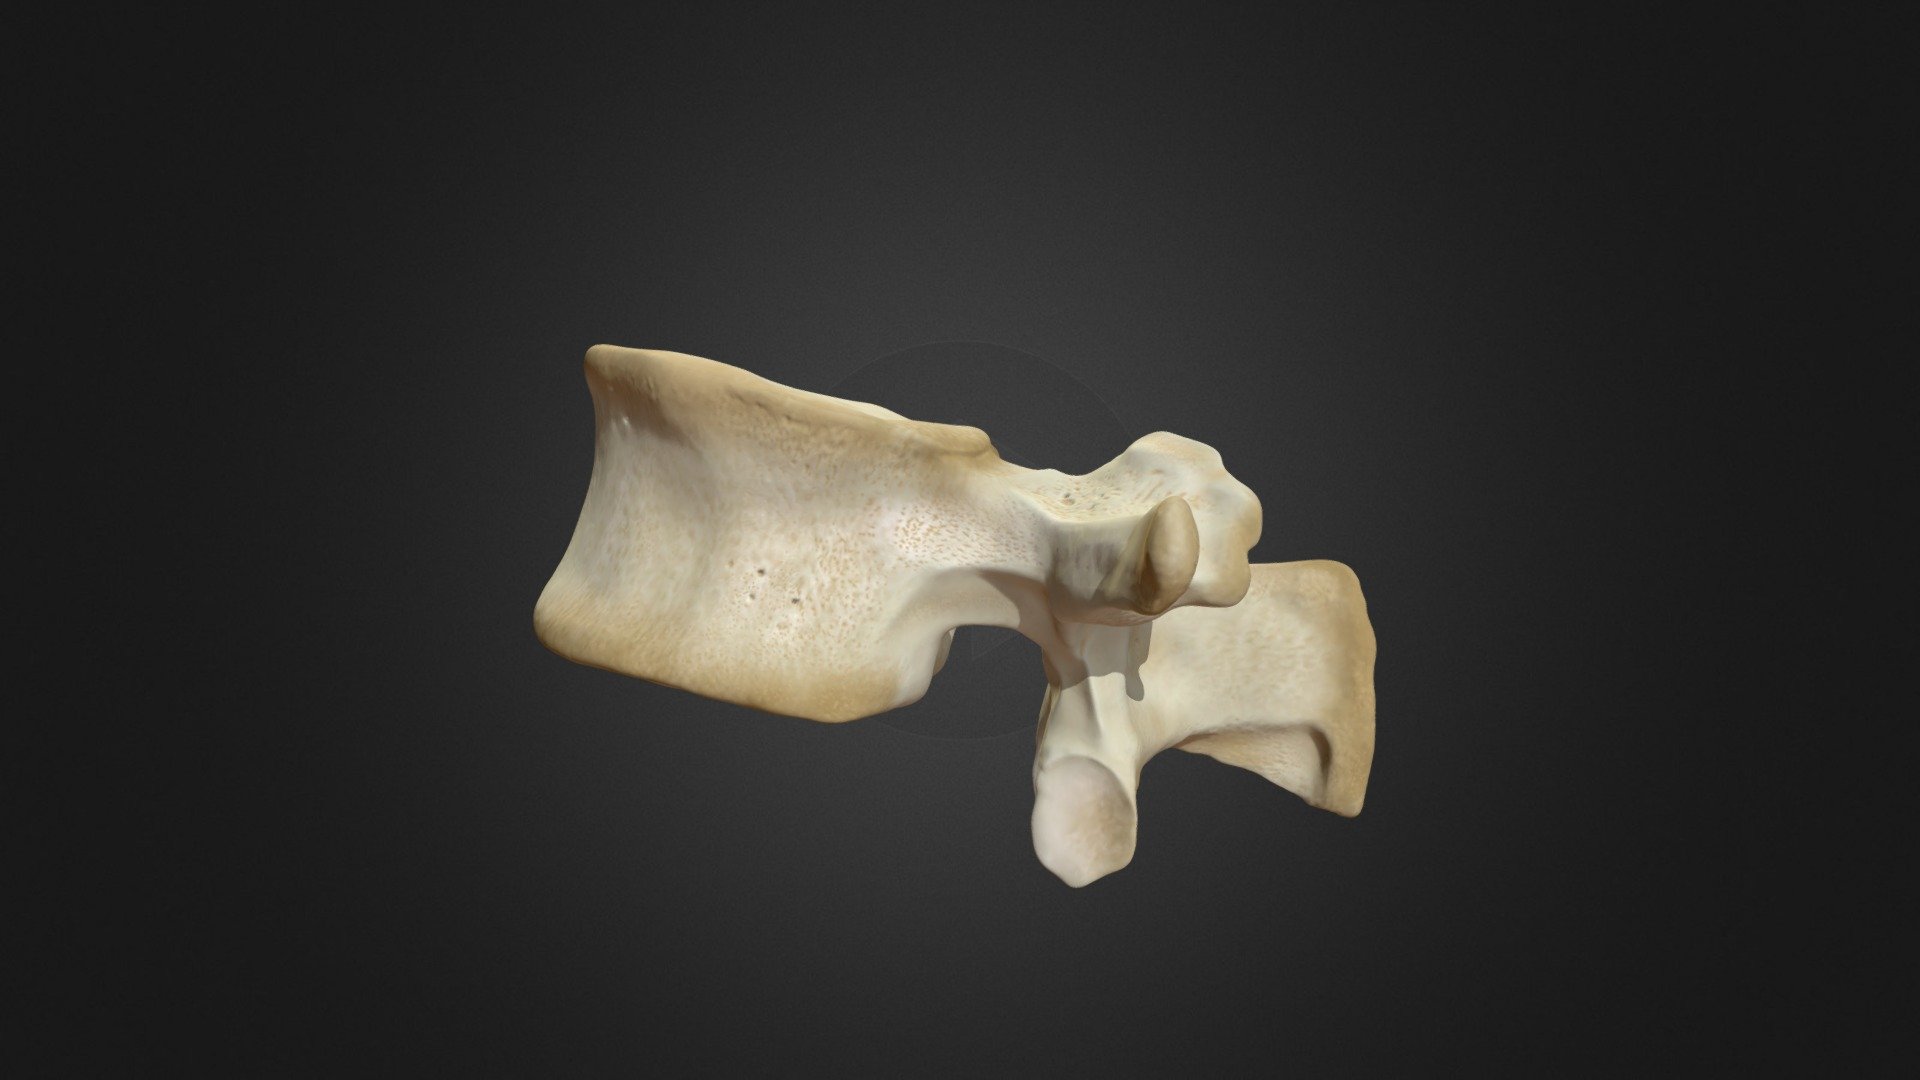 This is a realistic sculpt of the first Lumbar Vertebra of a healthy human - created using tons of references from different sources, even real human bones! 
See my other models for more vertebrae and a combined lower spine.

Base model taken from MRI data, adapted, coloured and resculpted in ZBrush 3d model